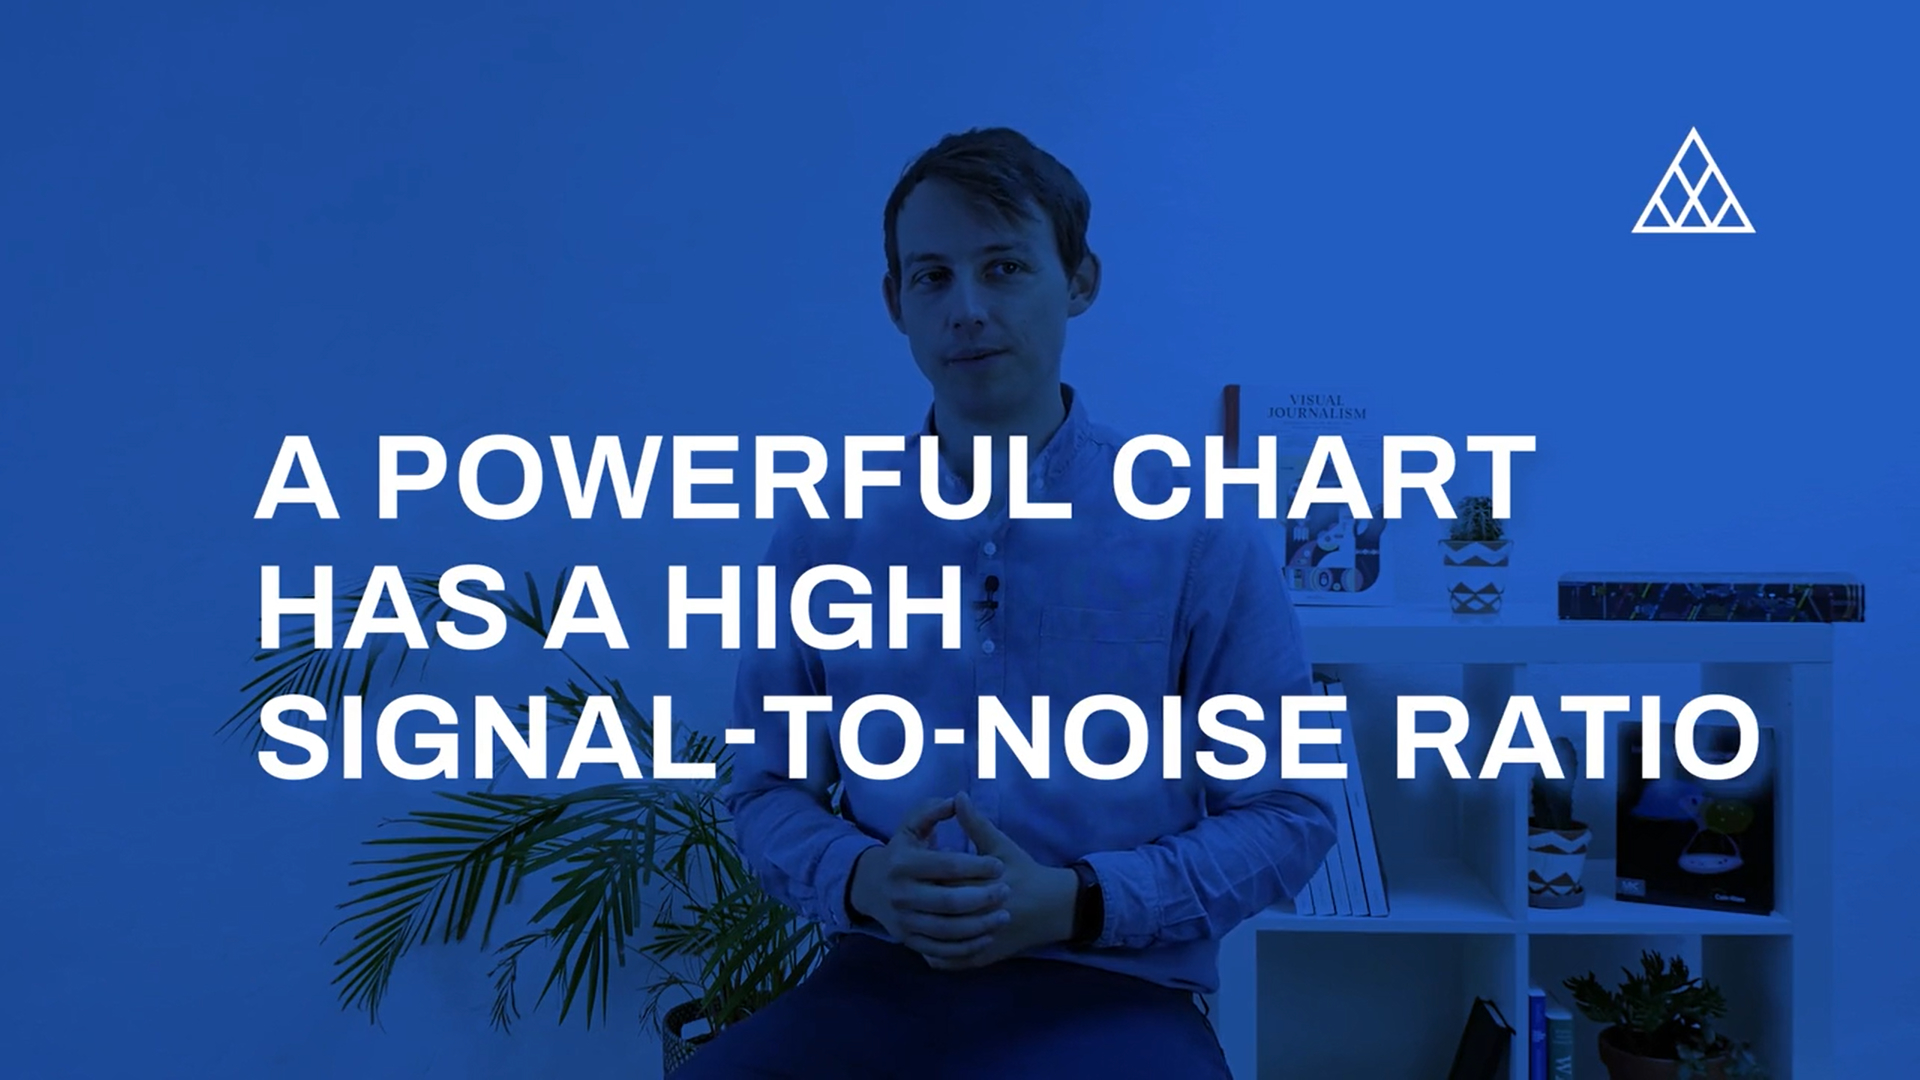 thumbnail for video 05 - a powerful chart has a high signal-to-noise ratio